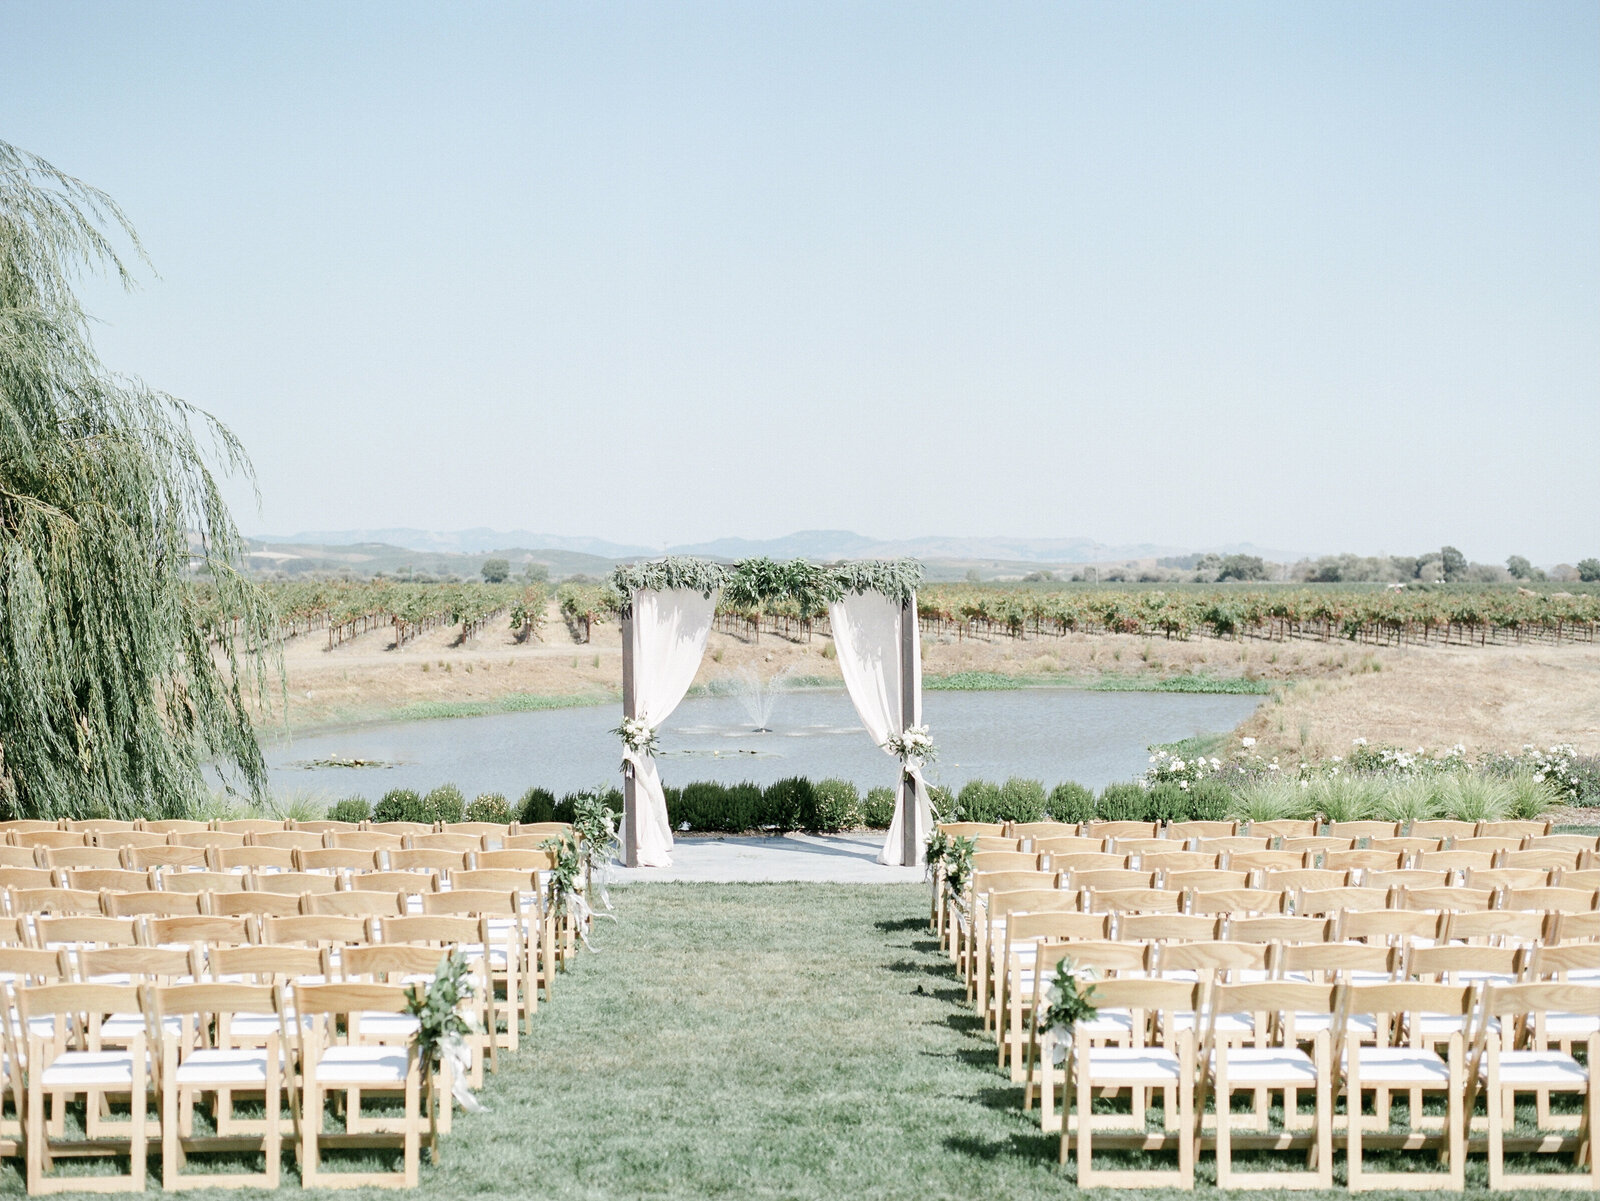 Wedding ceremony venue with arch by a lake